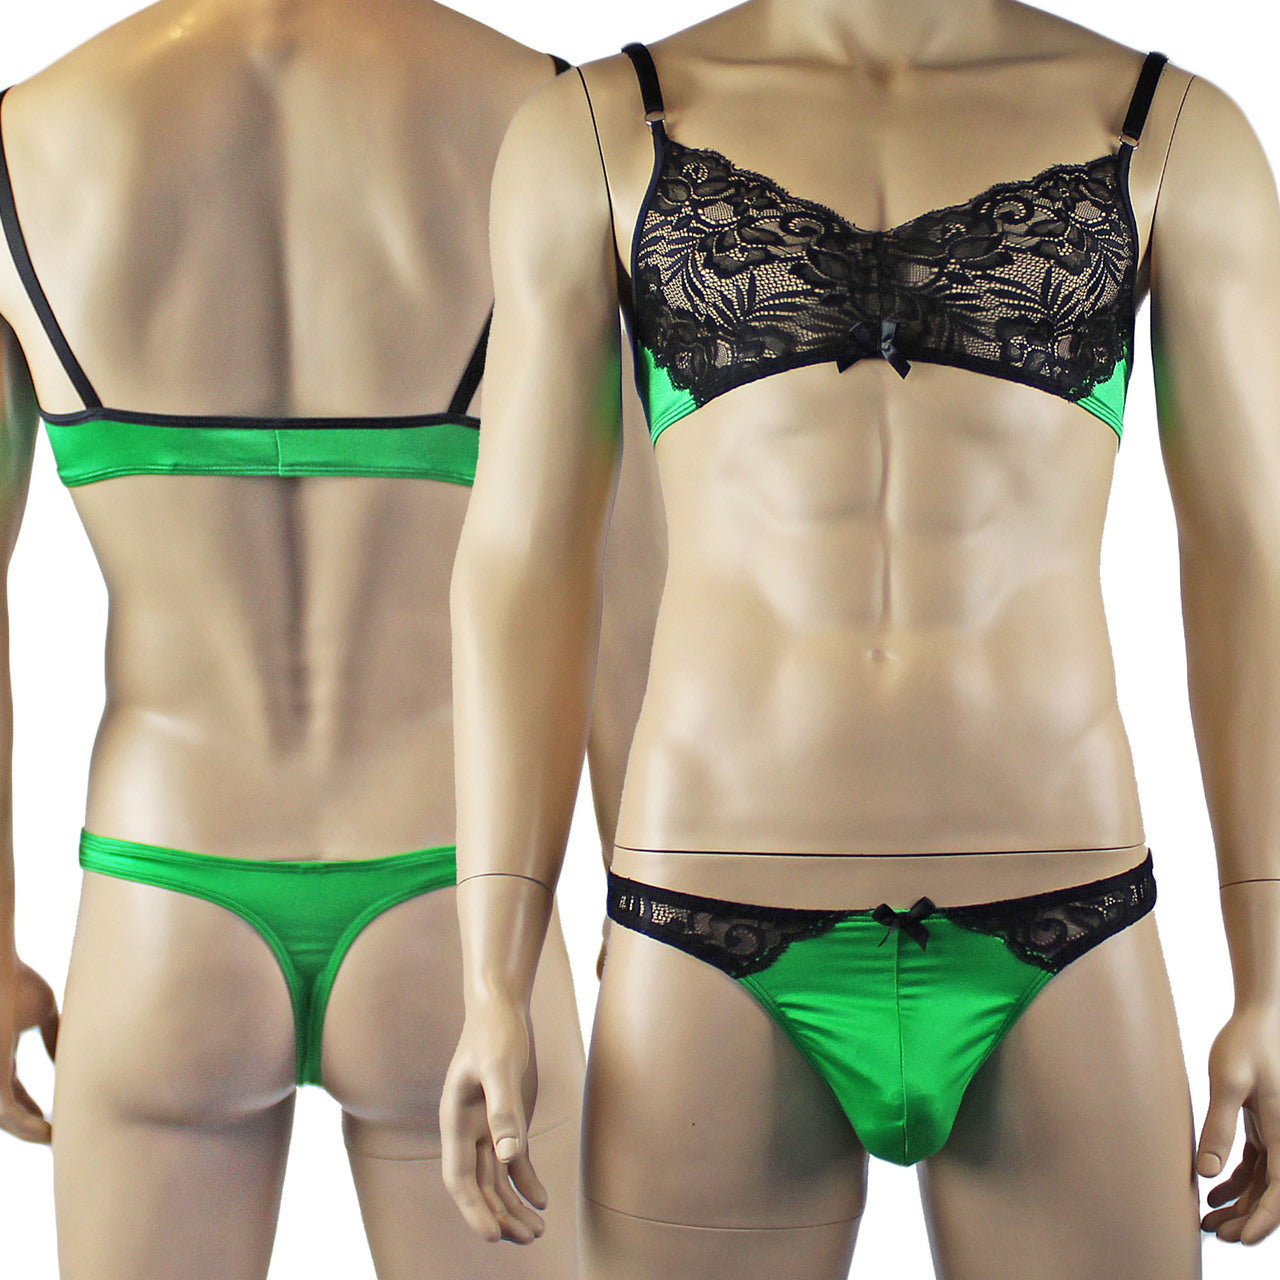 Mens Risque Bra Top and Thong Green and Black Lace